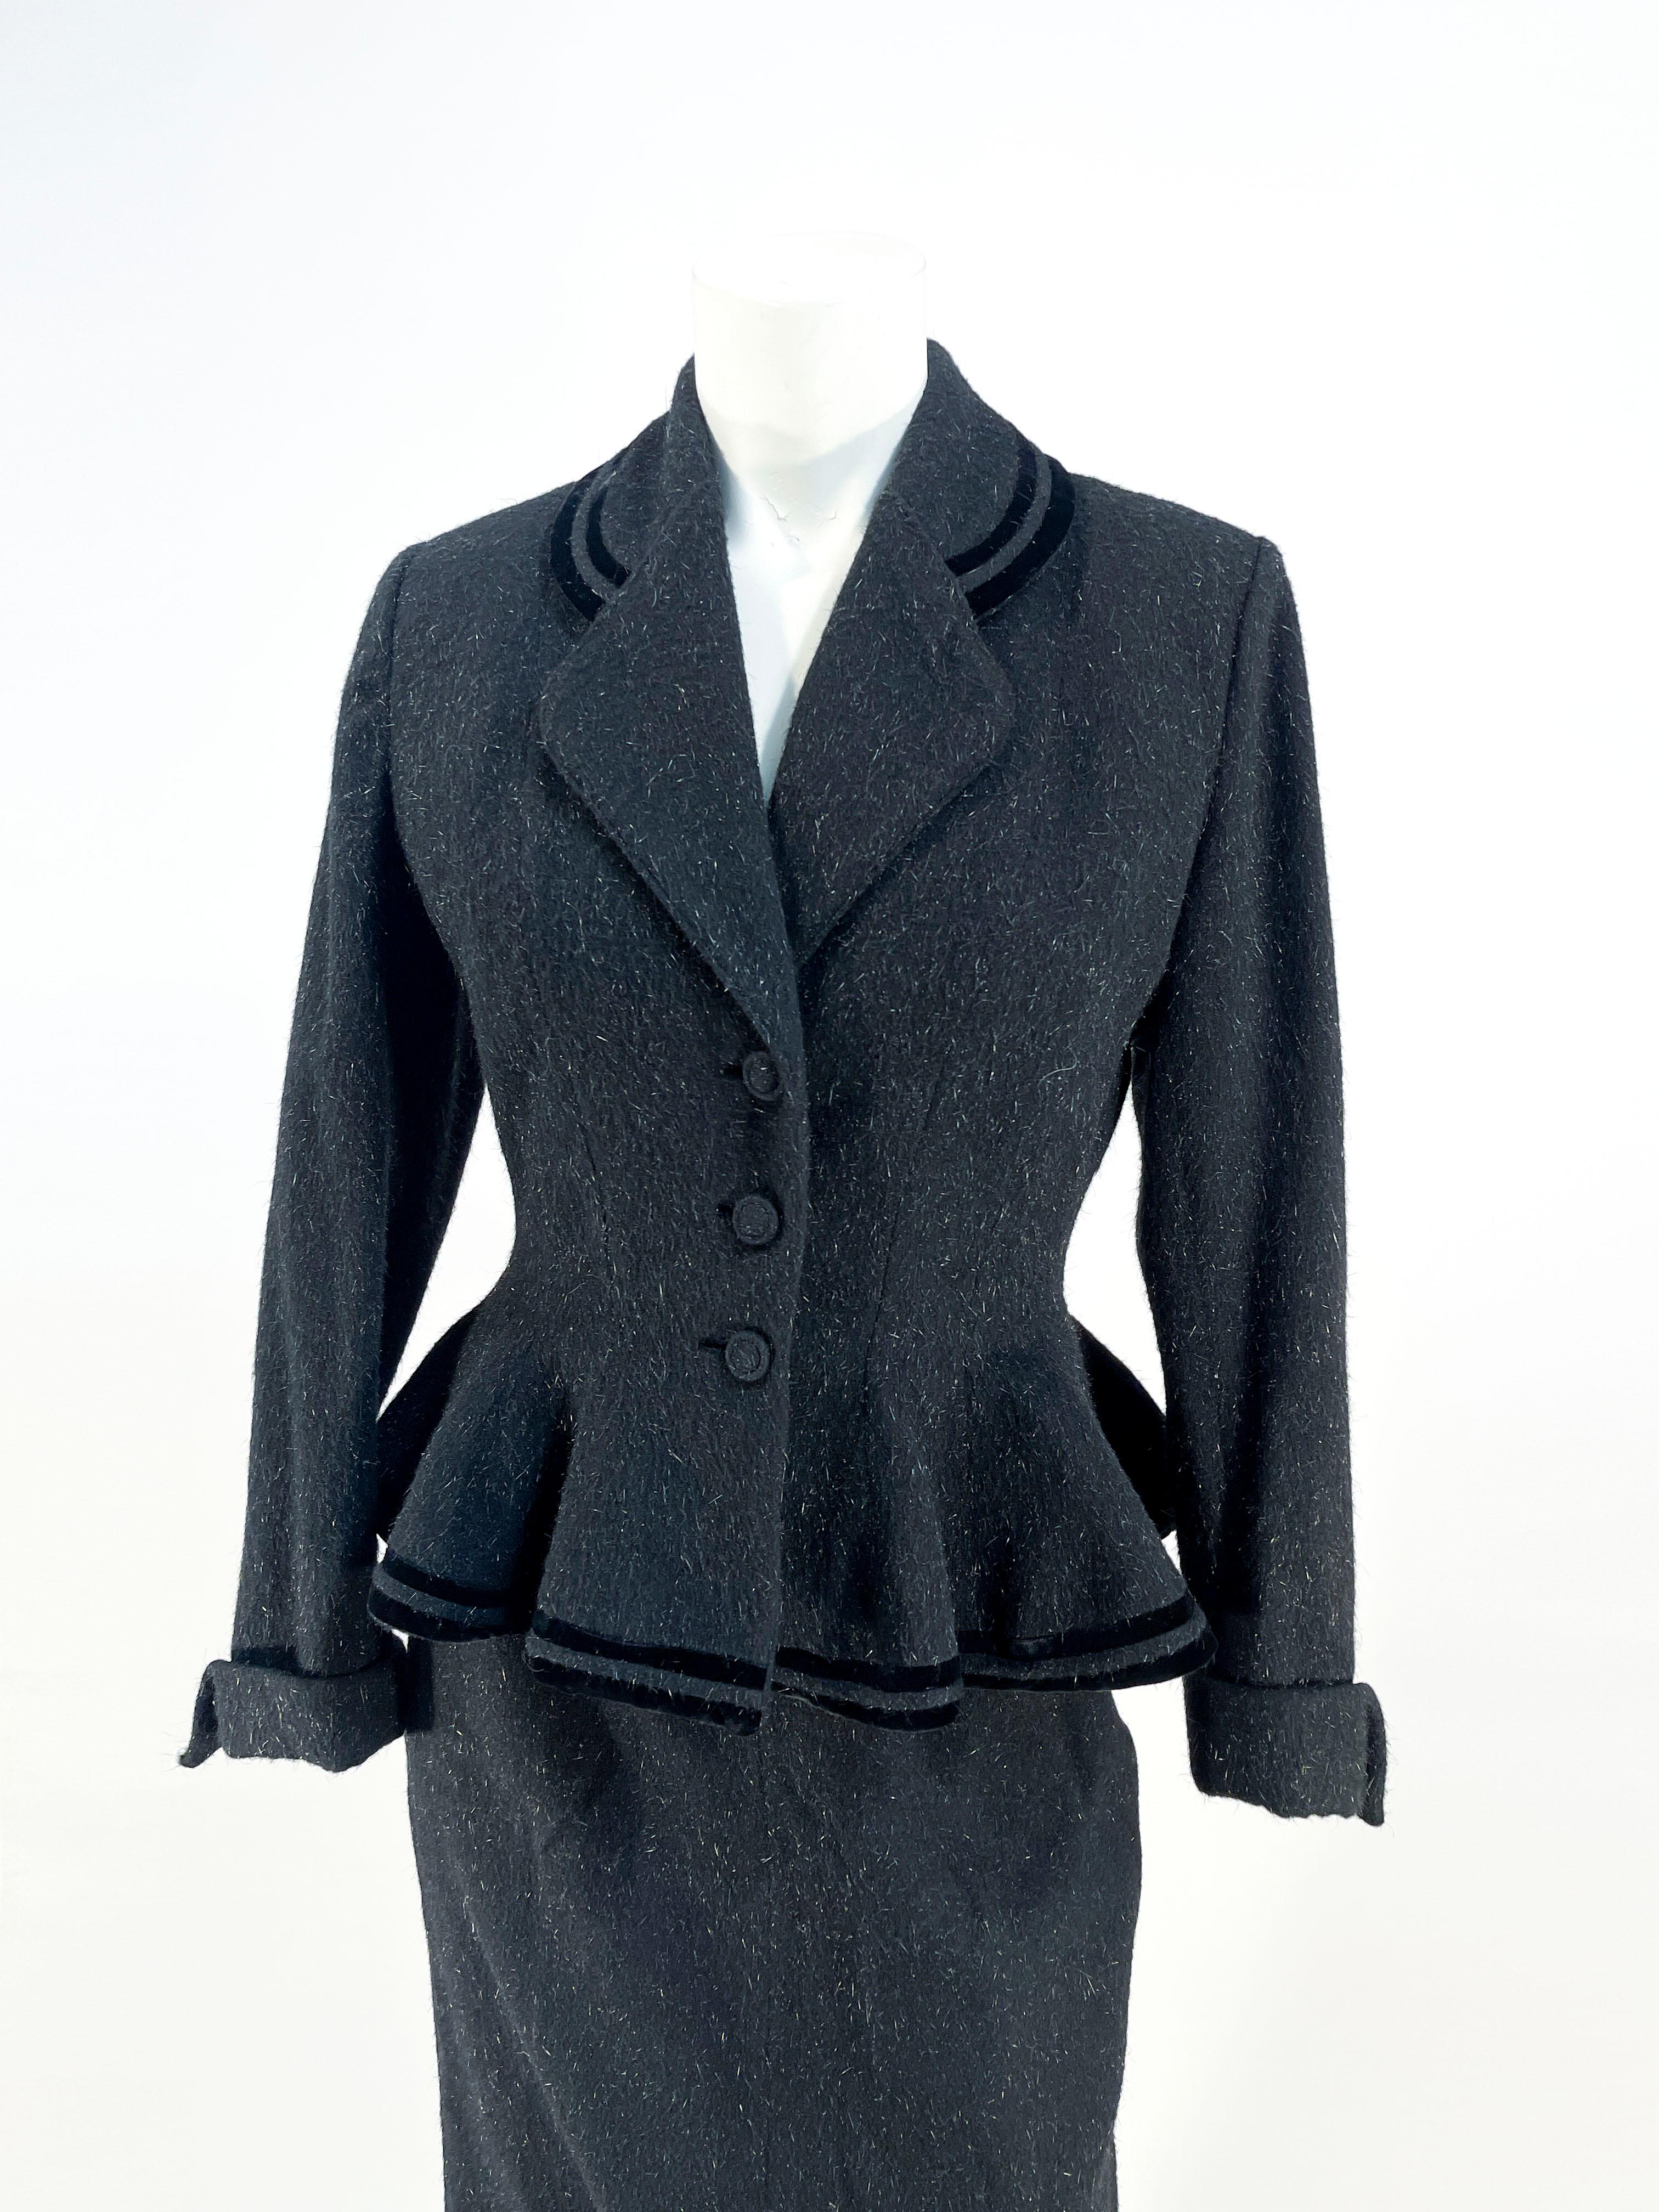 Late 1940s to early 1950s Black Lilli Ann flecked wool jacket and skirt suit. The jacket features a notch collar, covered designer buttons, in-set button holes, double bands of velvet trim accenting the color and hem, and a fitted wasp waist that